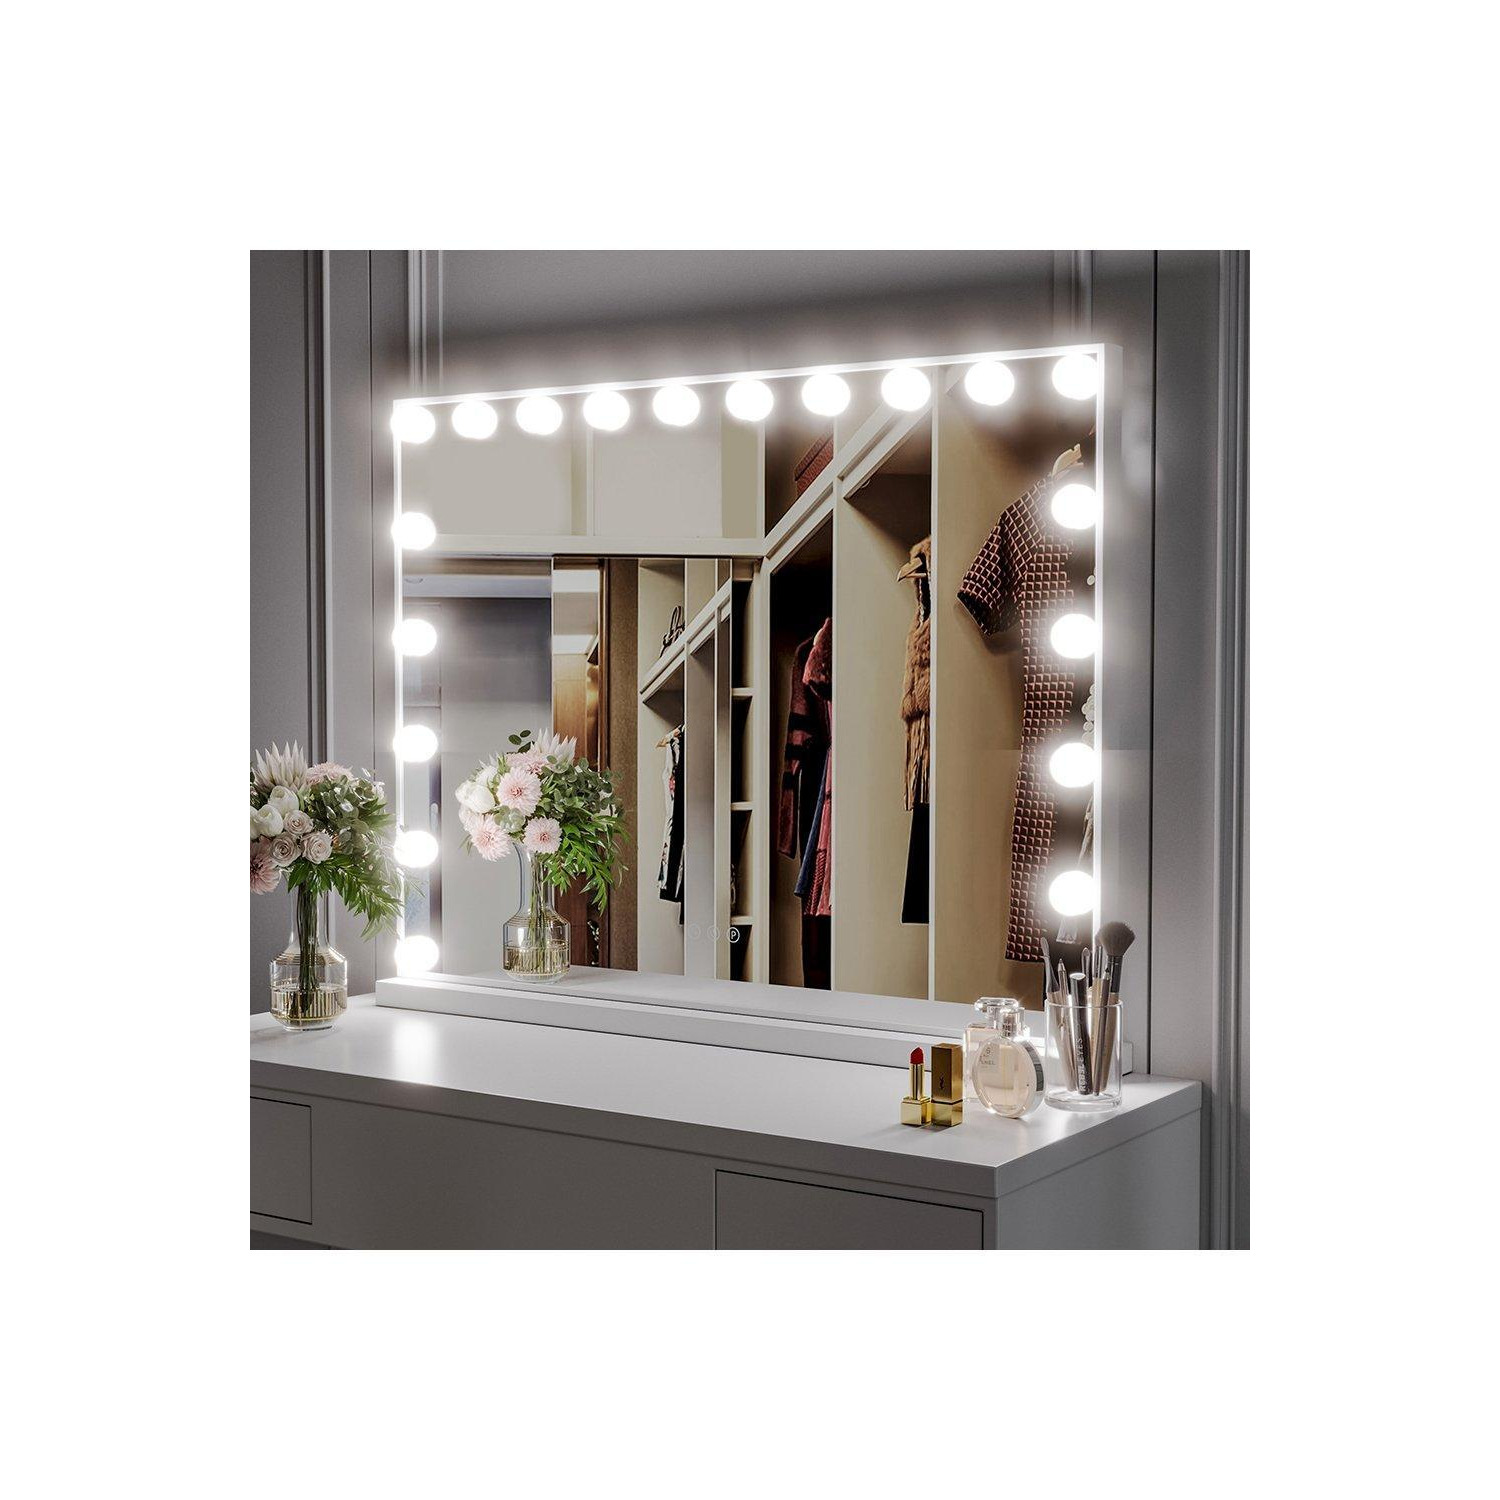 Crystal Edge Hollywood Vanity Mirror with 3 Color Light - image 1